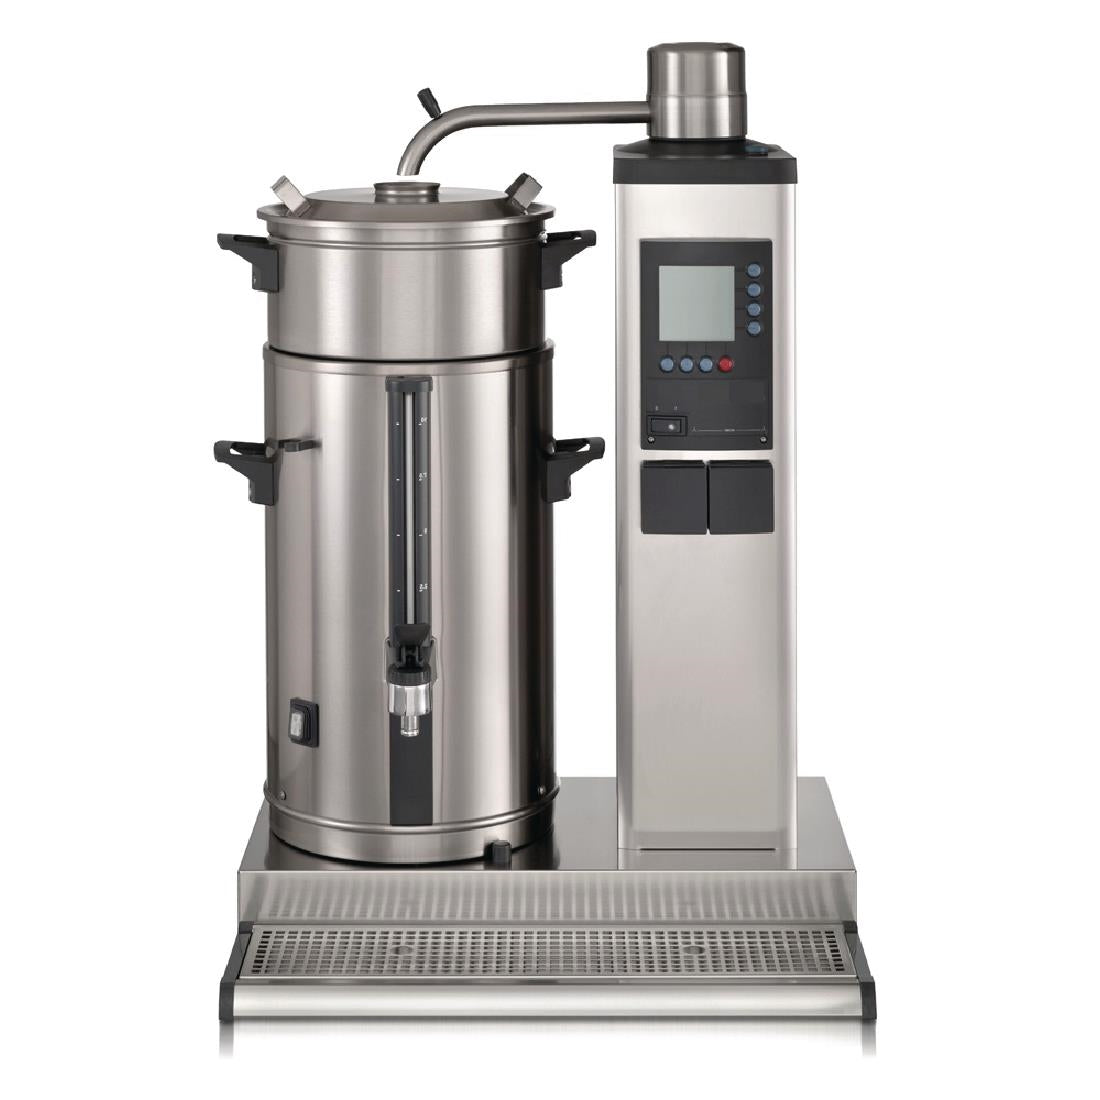 DC676-1P Bravilor B10 L Bulk Coffee Brewer with 10Ltr Coffee Urn Single Phase JD Catering Equipment Solutions Ltd